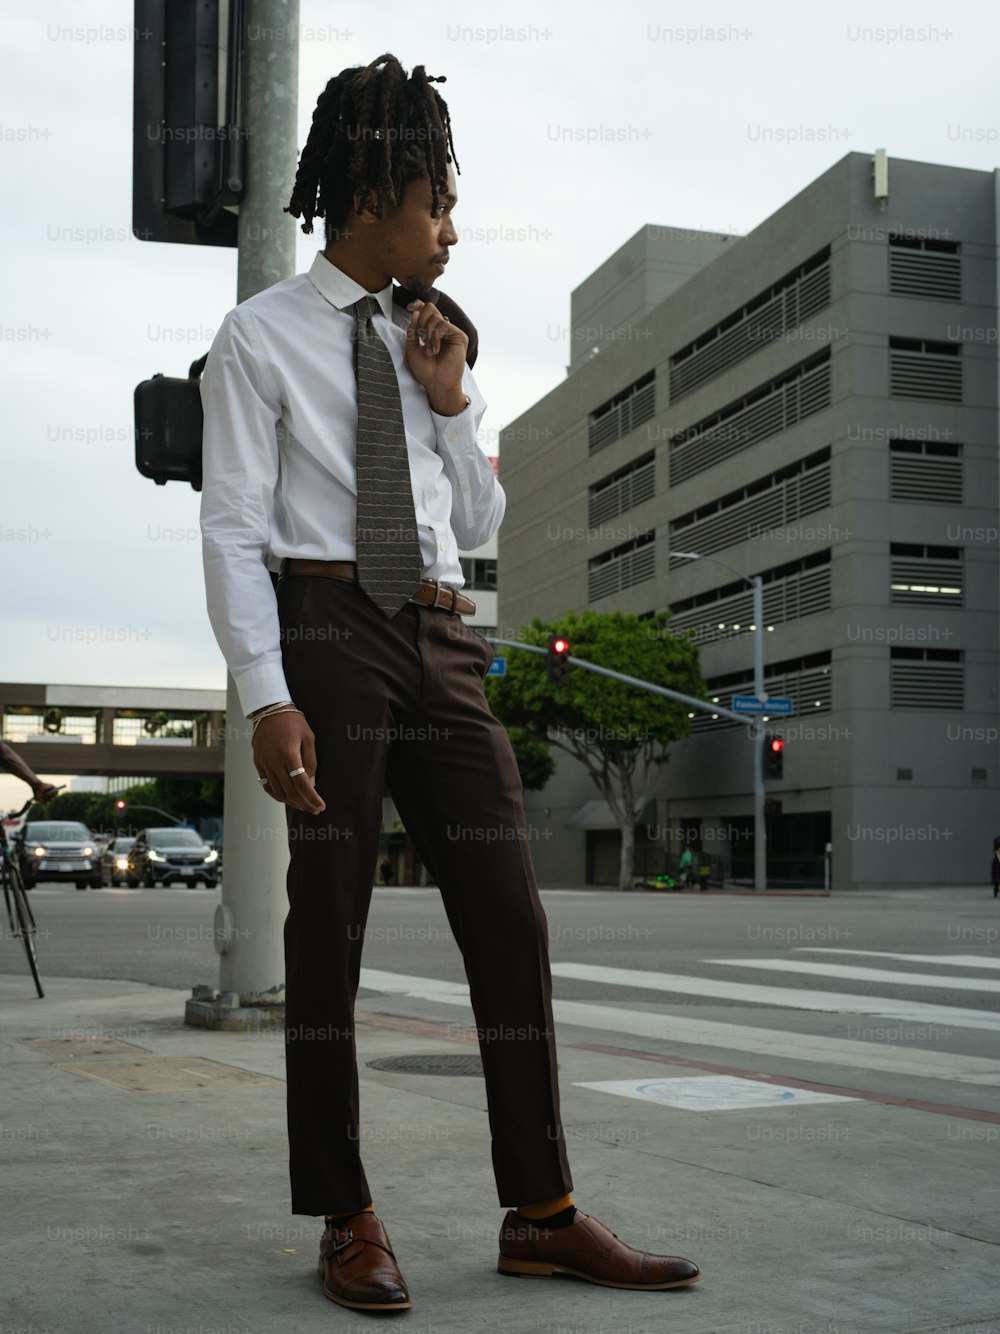 a man in a suit and tie standing on a street corner